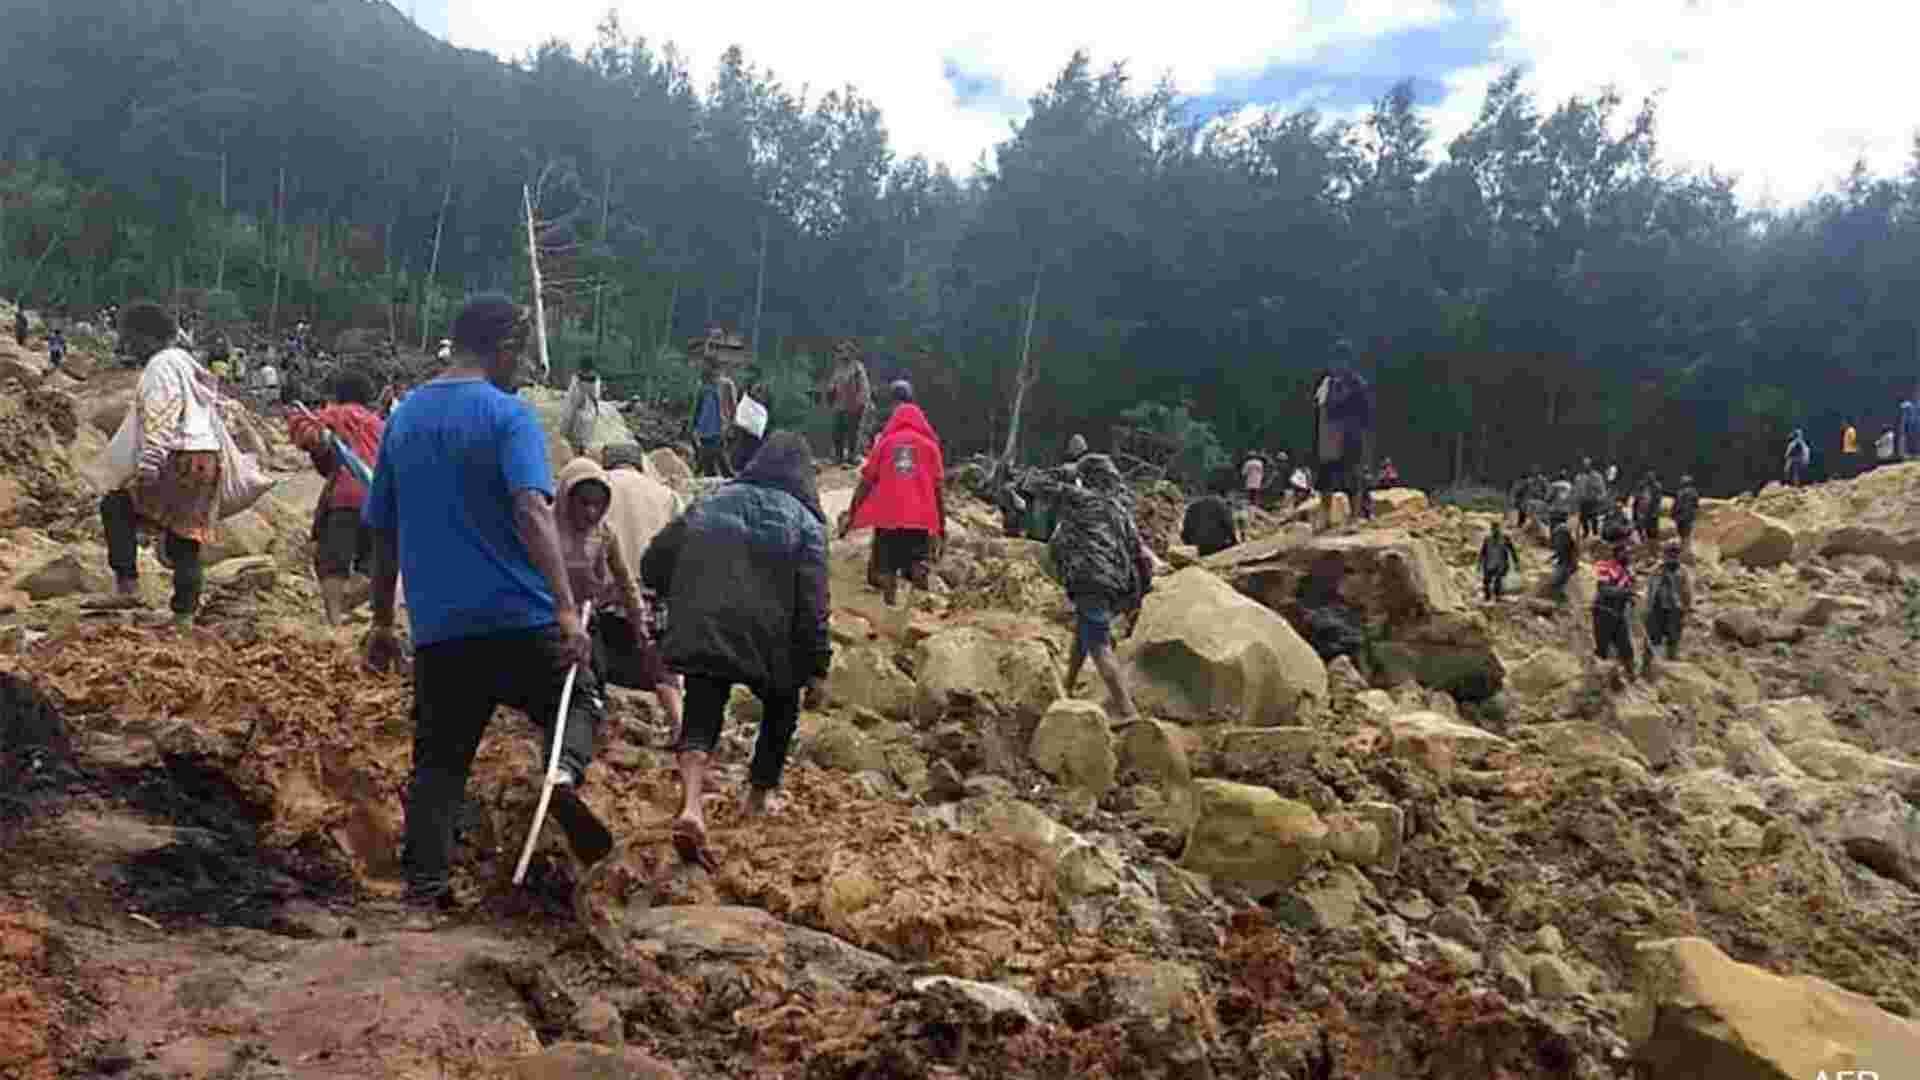 India Extends $1 Million Relief Aid to Landslide-Stricken Papua New Guinea